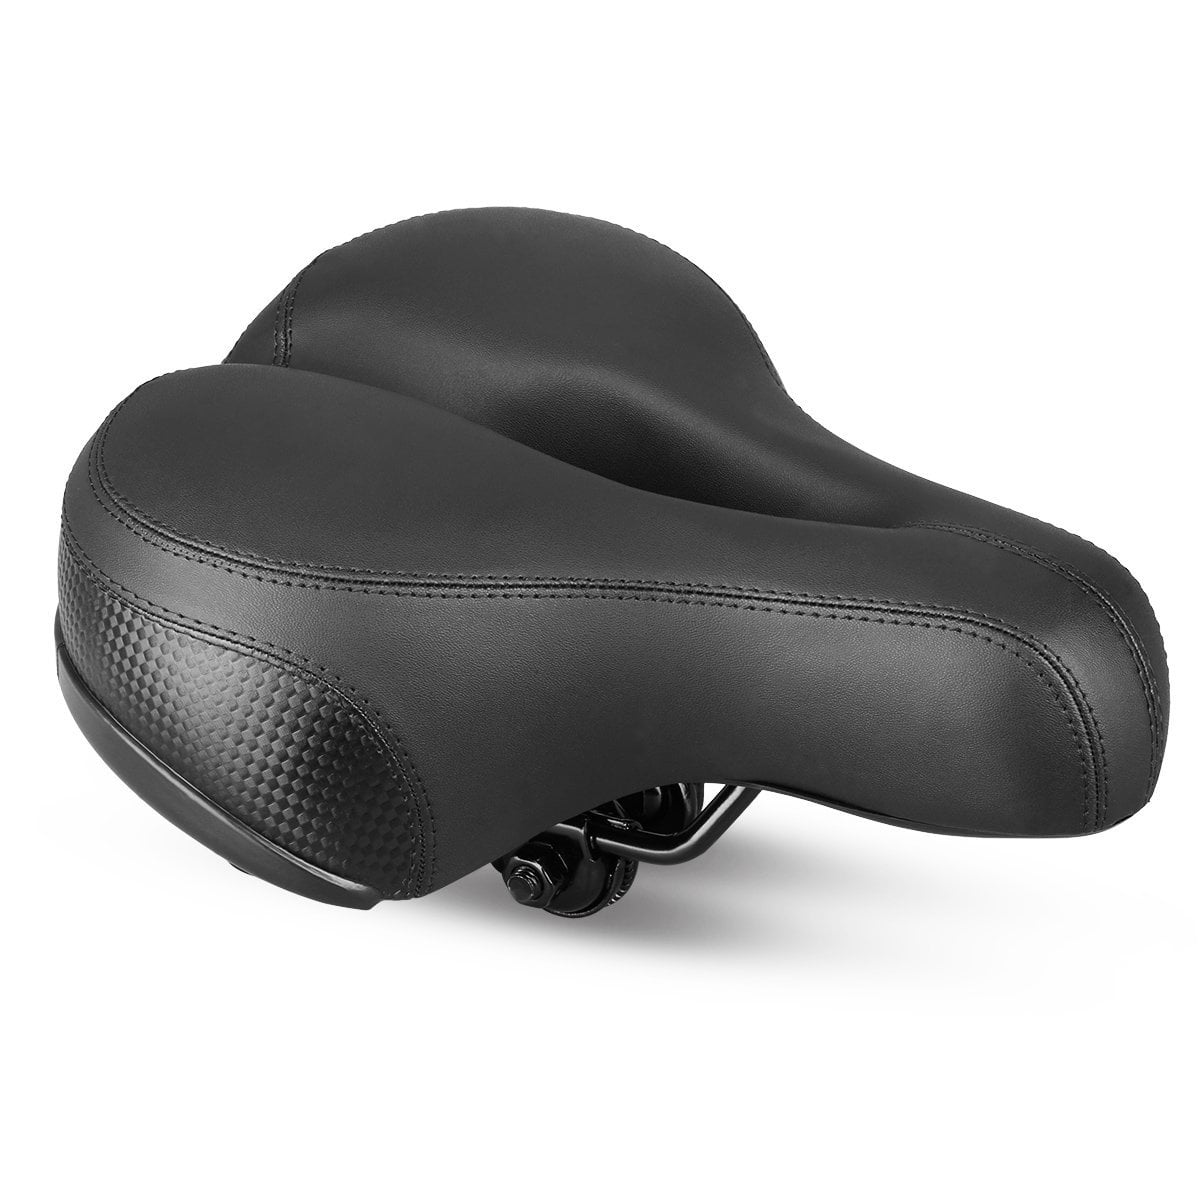 Soft Bike Seat Replacement Waterproof Wide Gel Padded Details about   Comfortable Bicycle Seat 